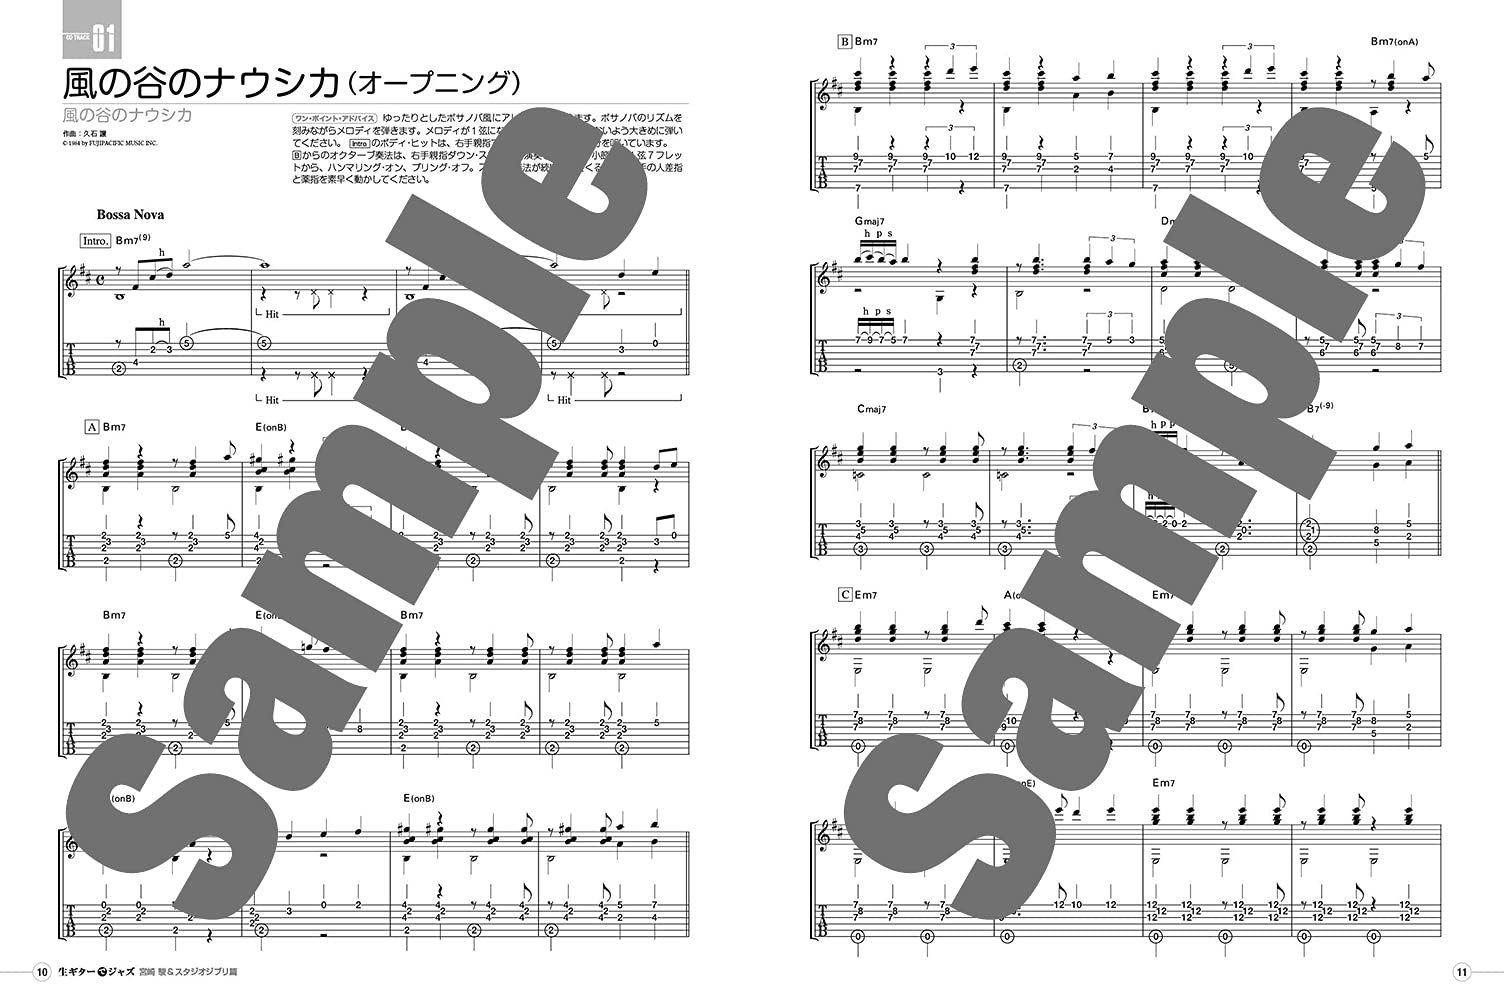 Hayao Miyazaki and Studio Ghibli Collection Jazz arrangement arrangement arrangement arrangement for Acoustic Guitar Solo w/CD